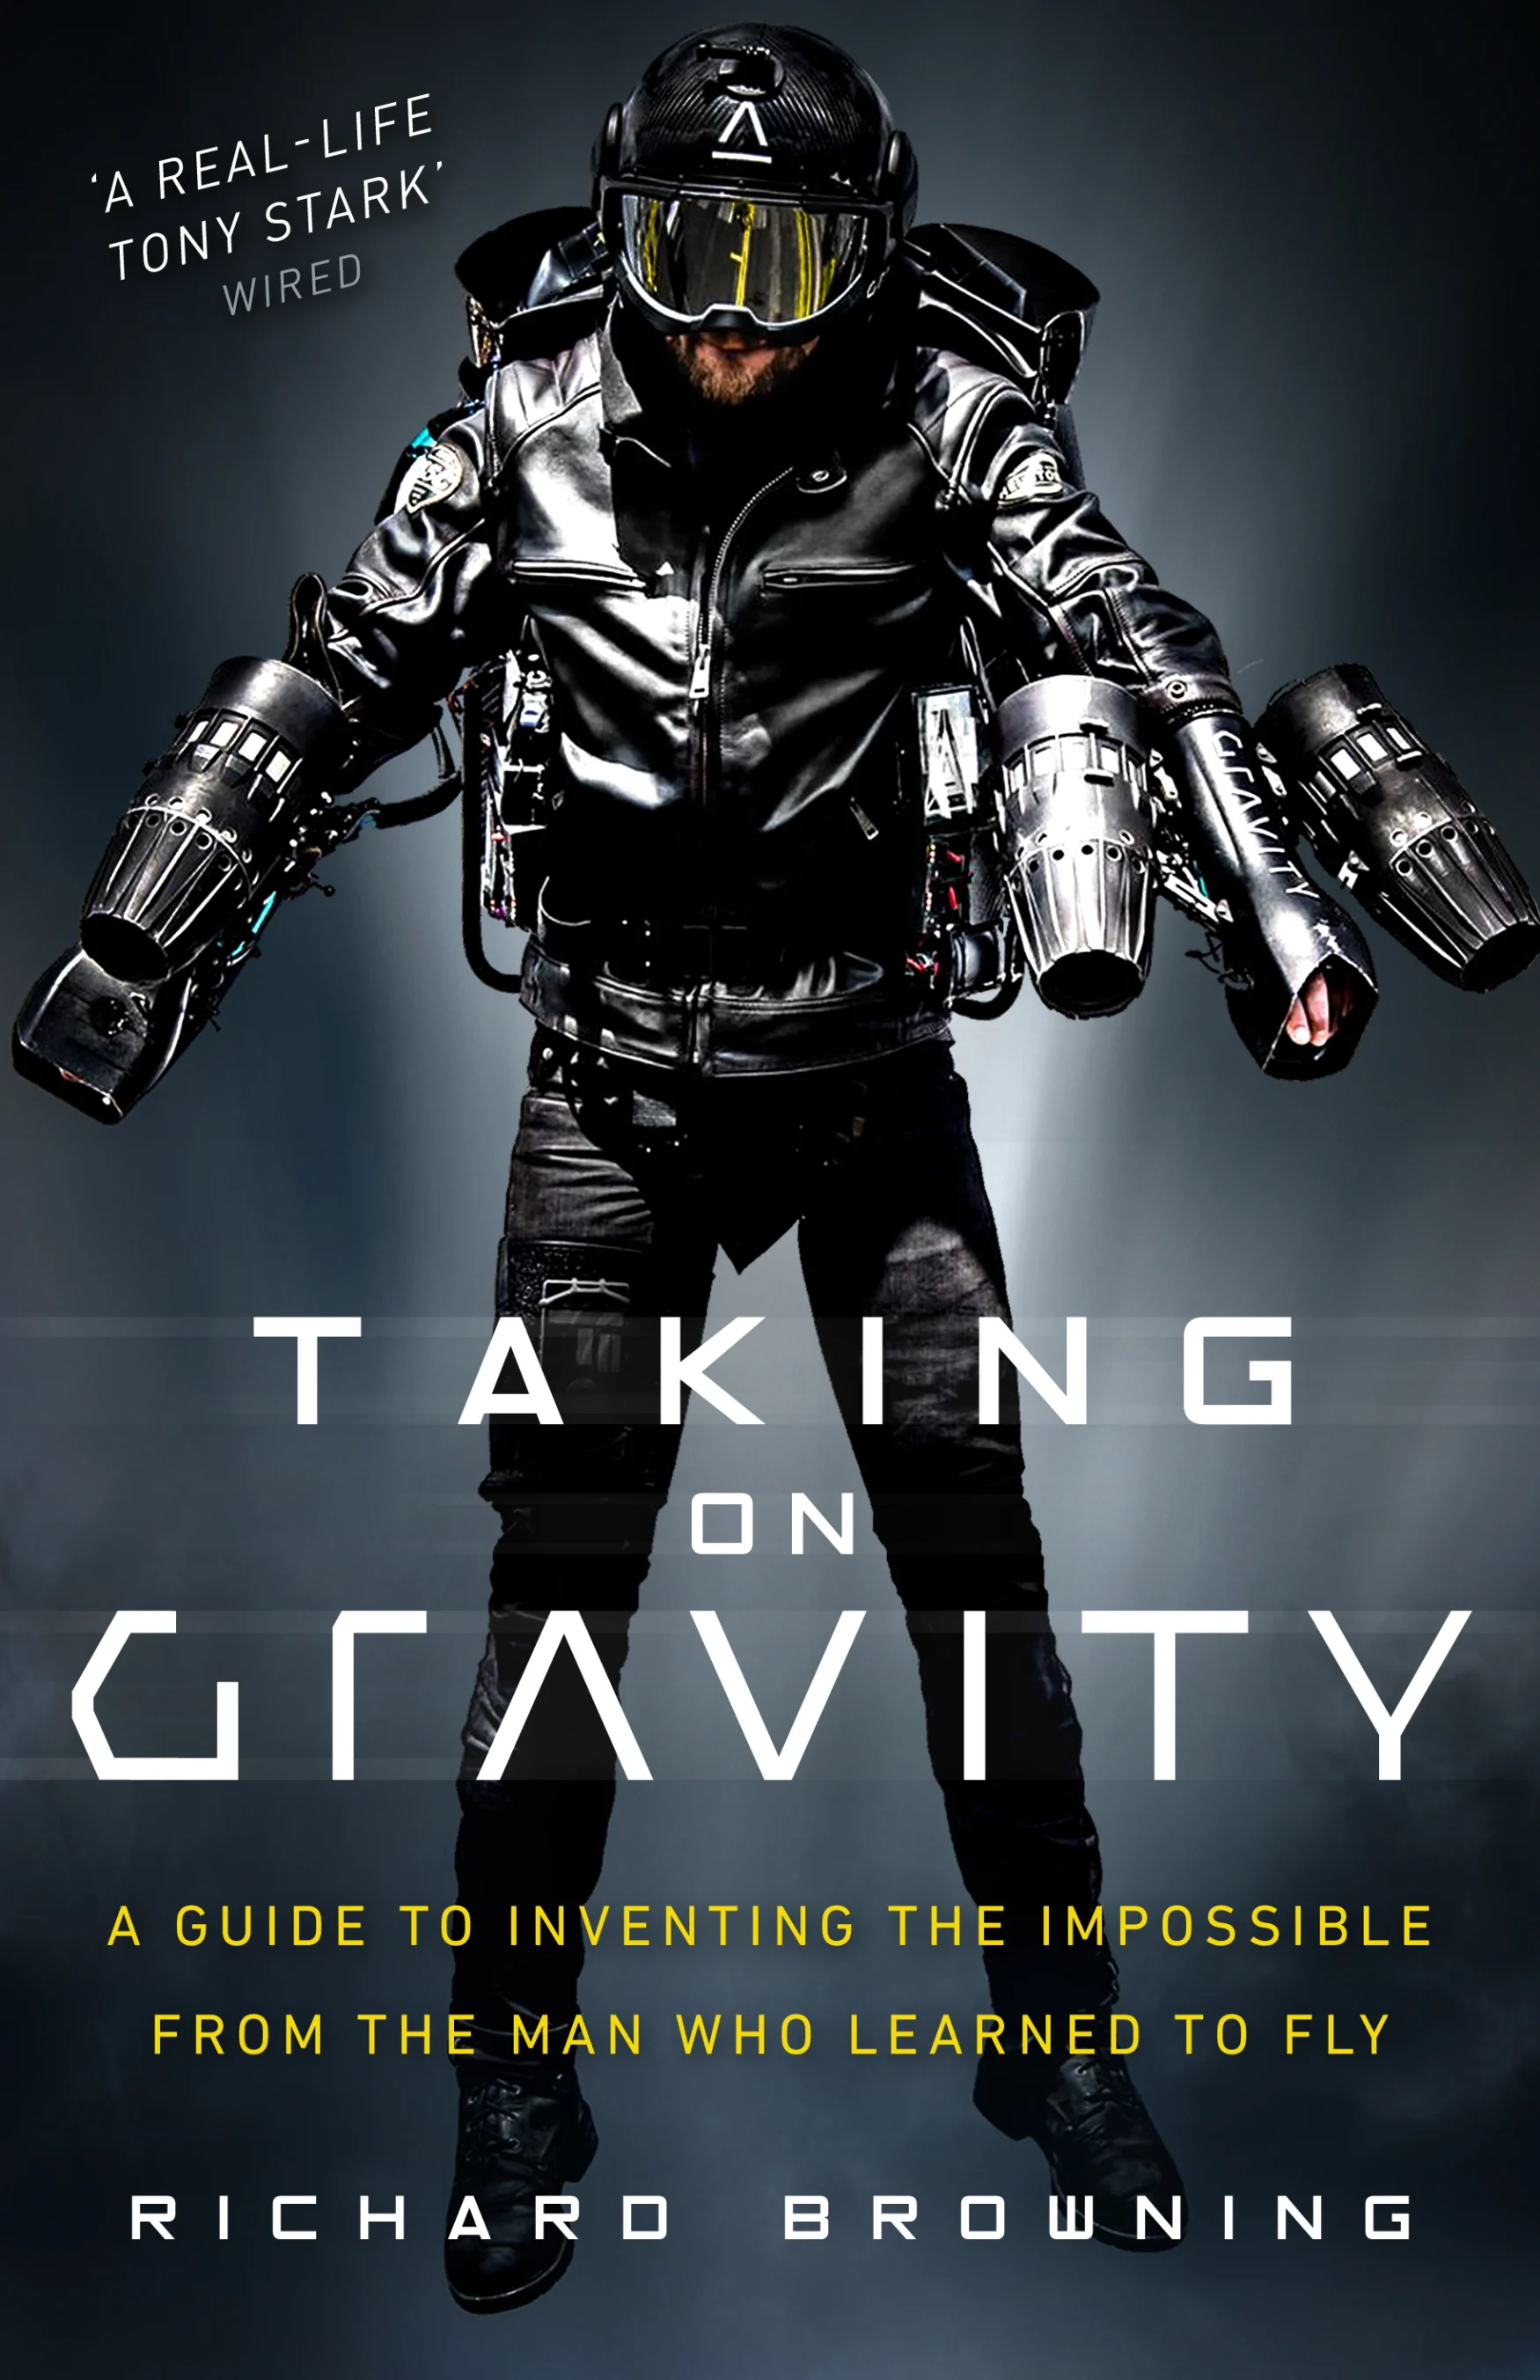 Taking on Gravity by Richard Browning
